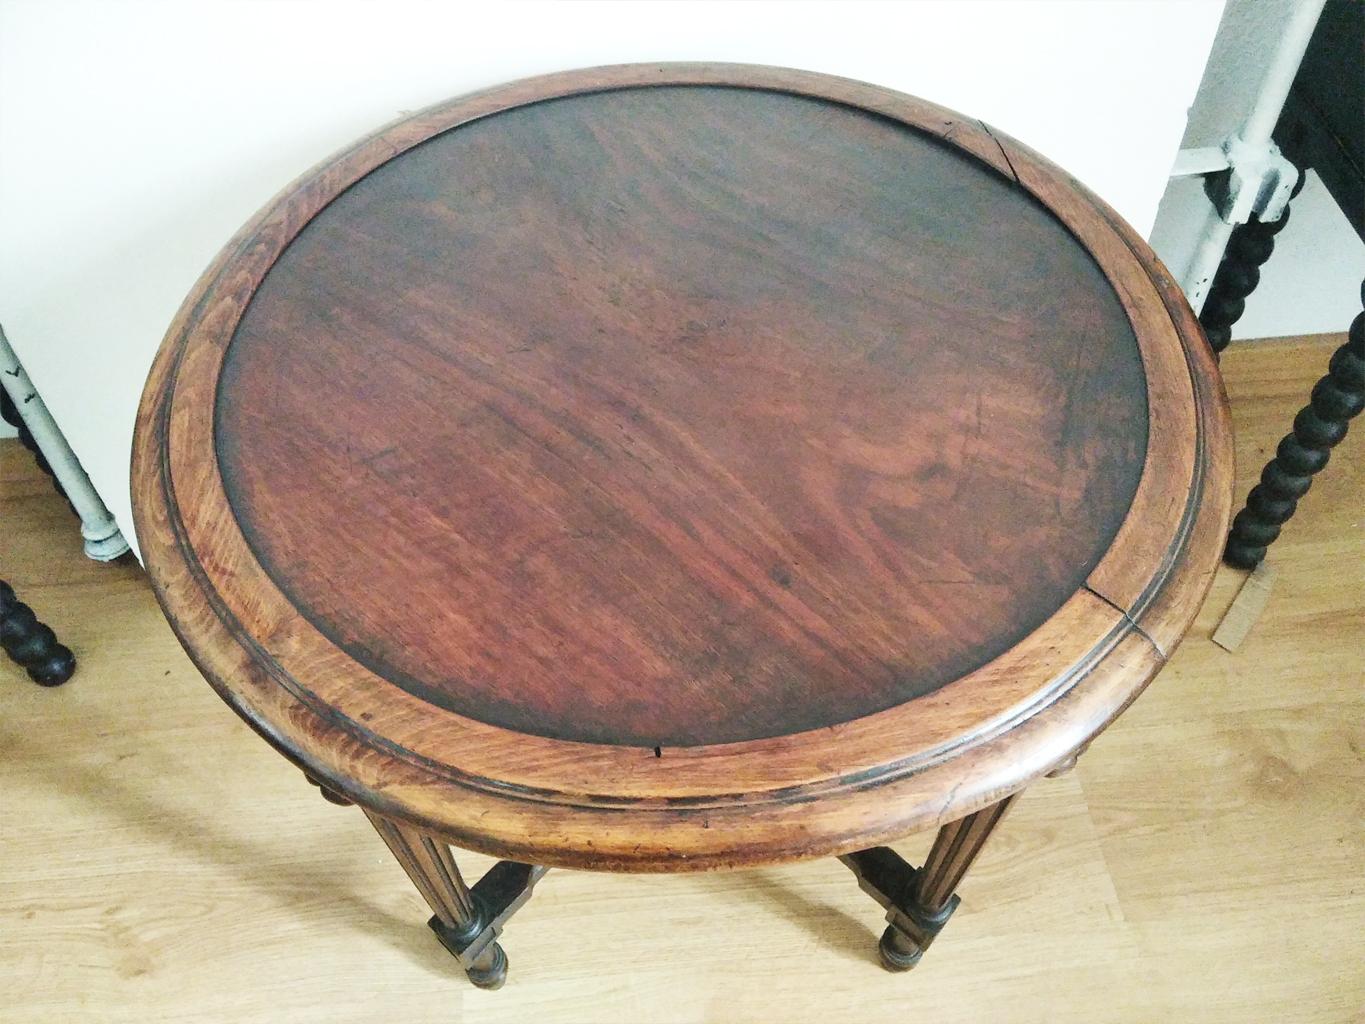 Round side table features barley 

With his patina, which shows the age of the piece, and its elegant lines

They are in very good condition,

End table small table, side table, round table, living room table, small table
salomonica columns,